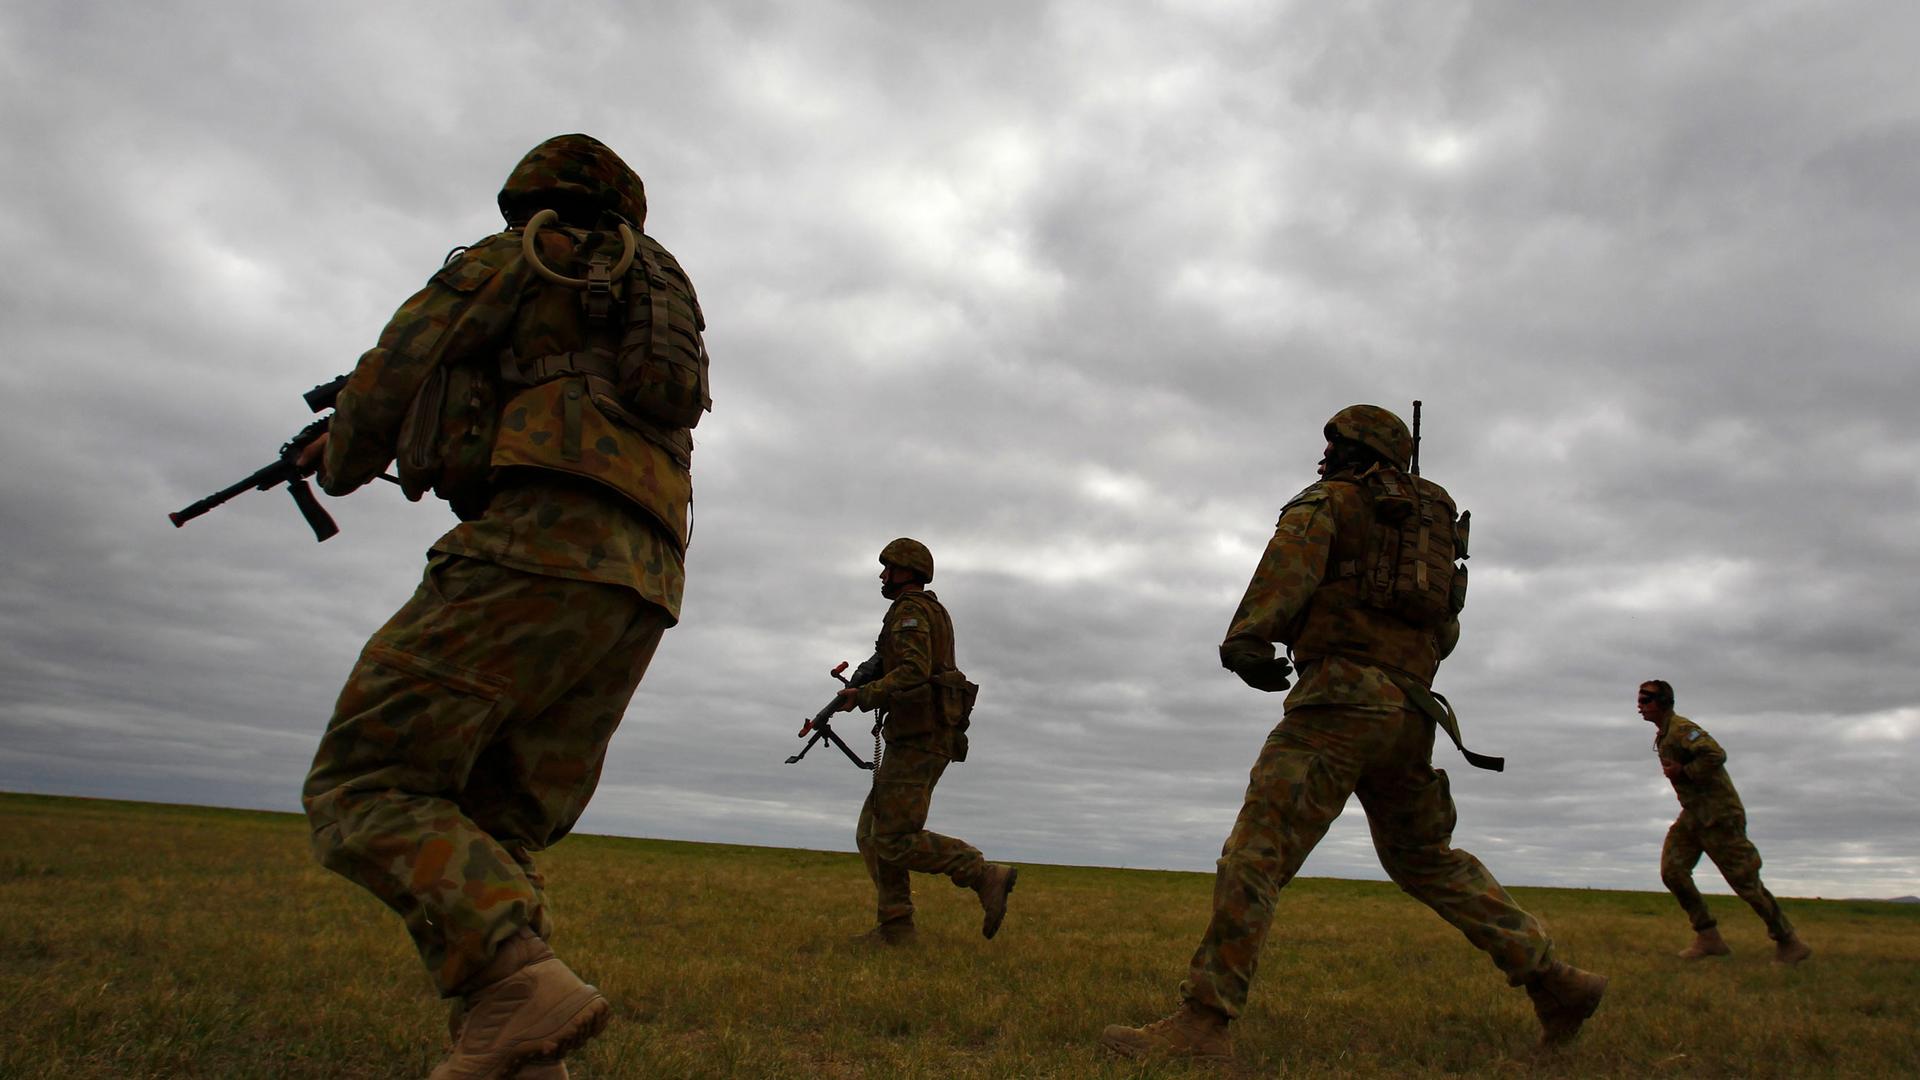 A group of four soldiers are shown walking across a field wearing full battlefield fatigues and carrying weapons.